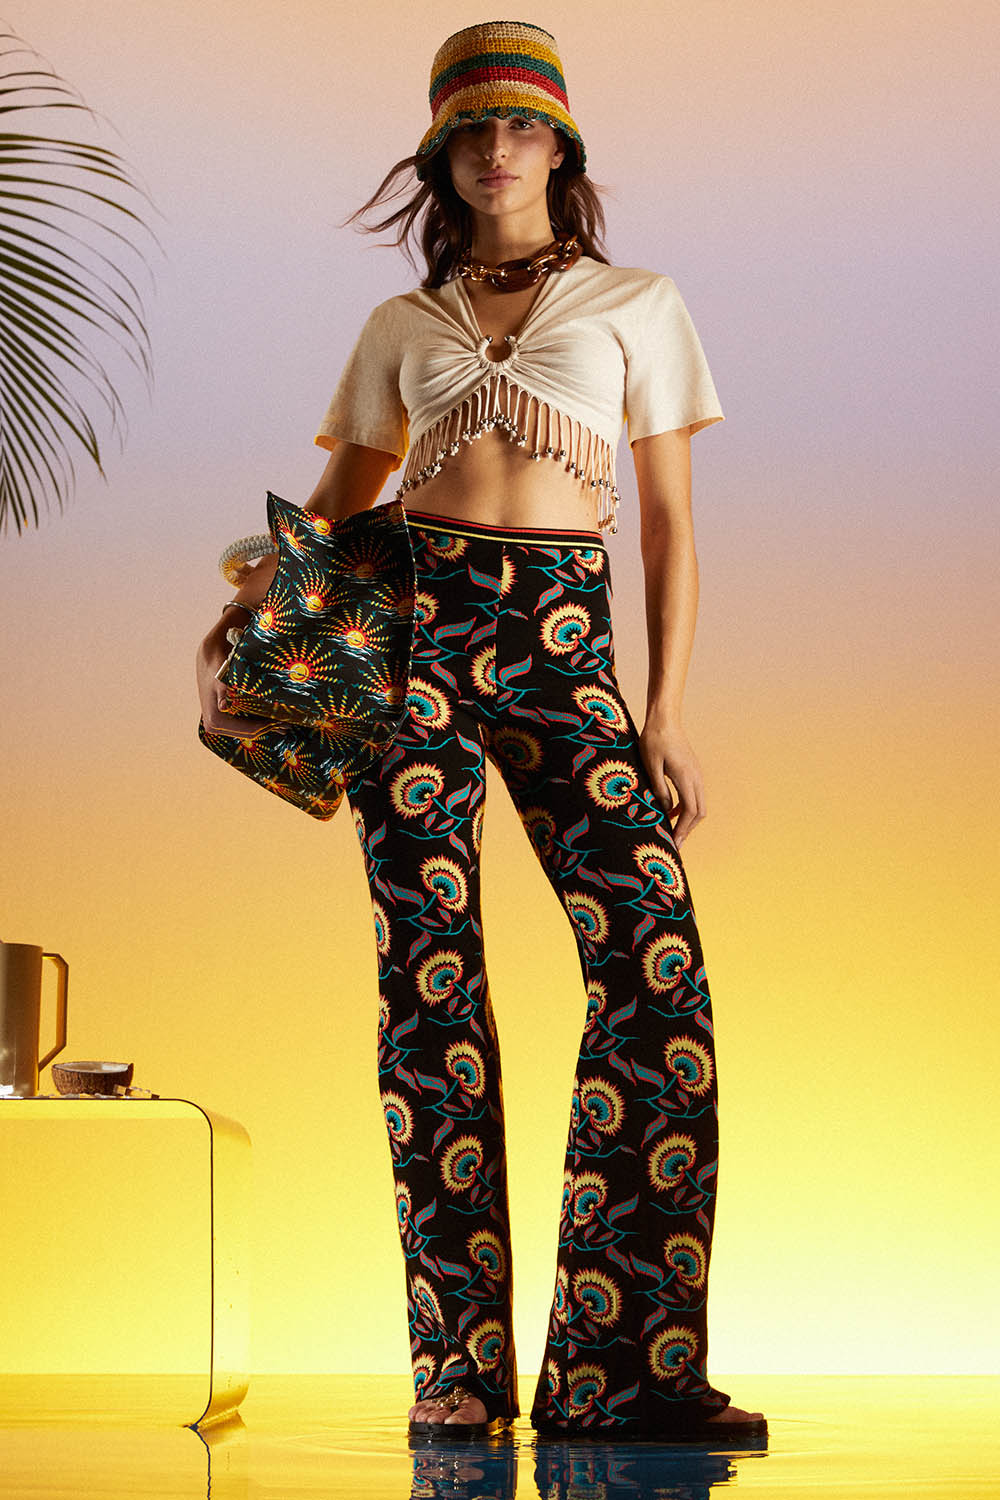 PACO RABANNE Summer 2022 Capsule Womenswear Collection